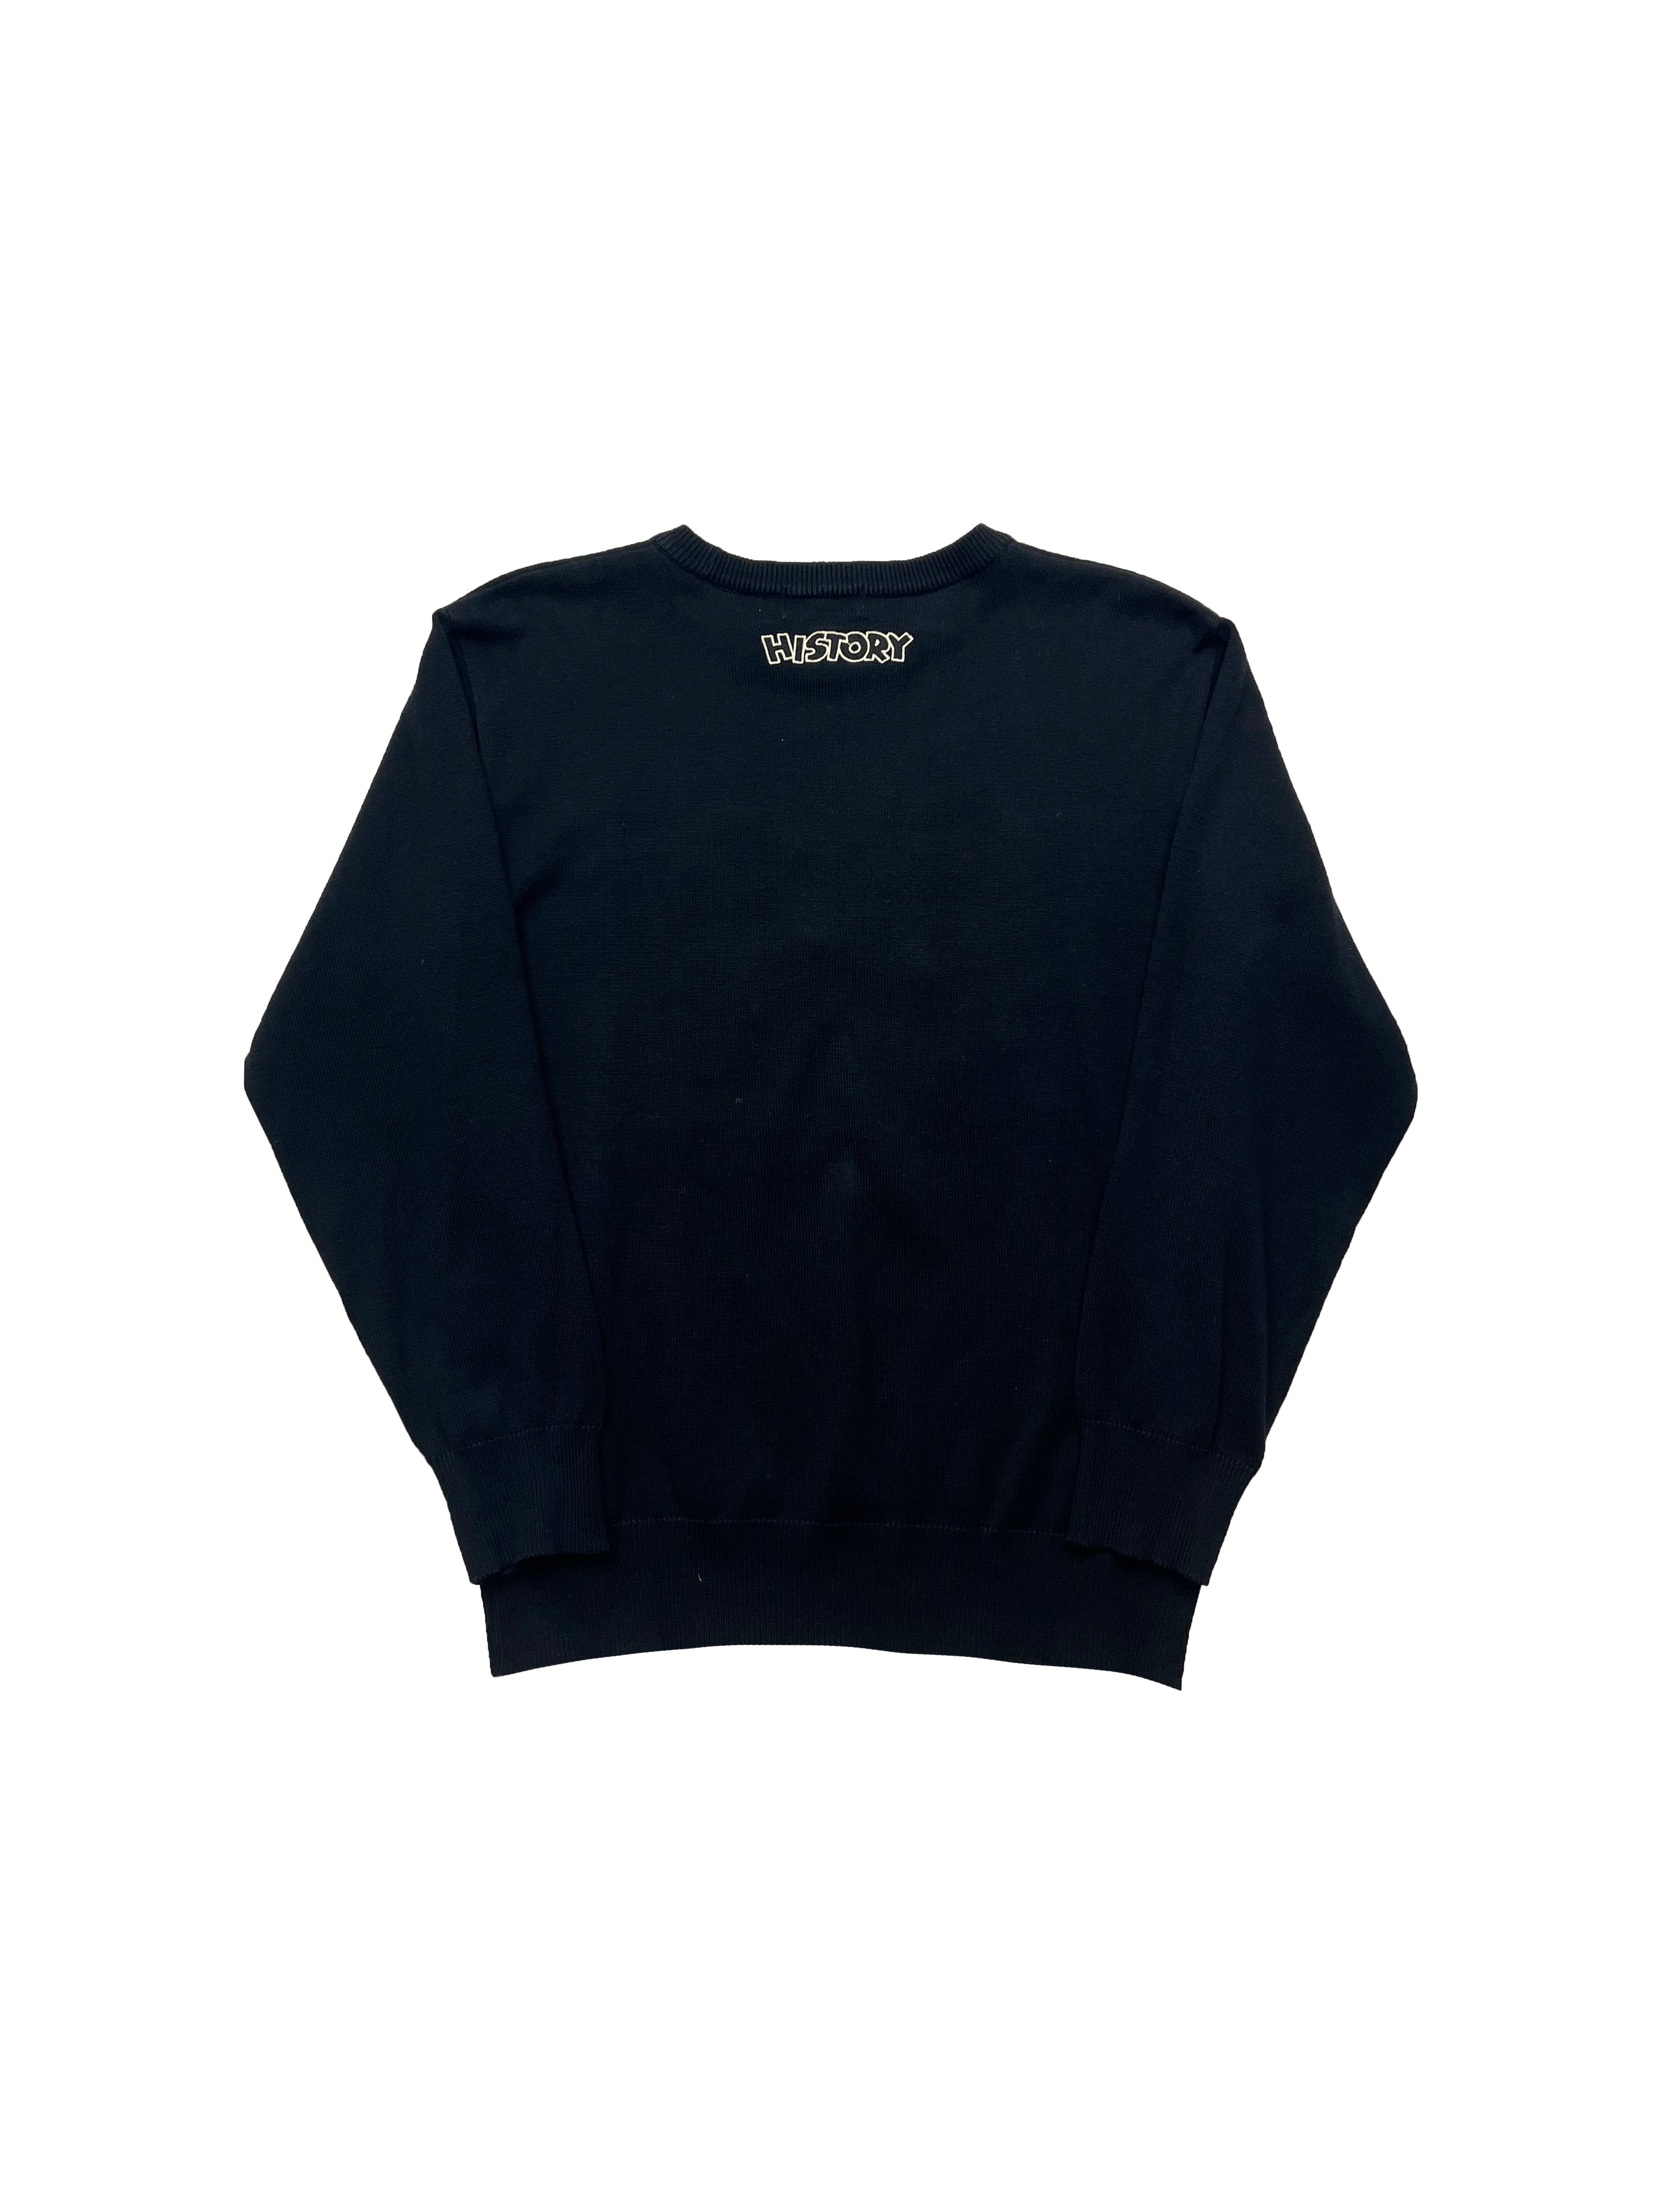 Iceberg History Spell Out Knit 00's